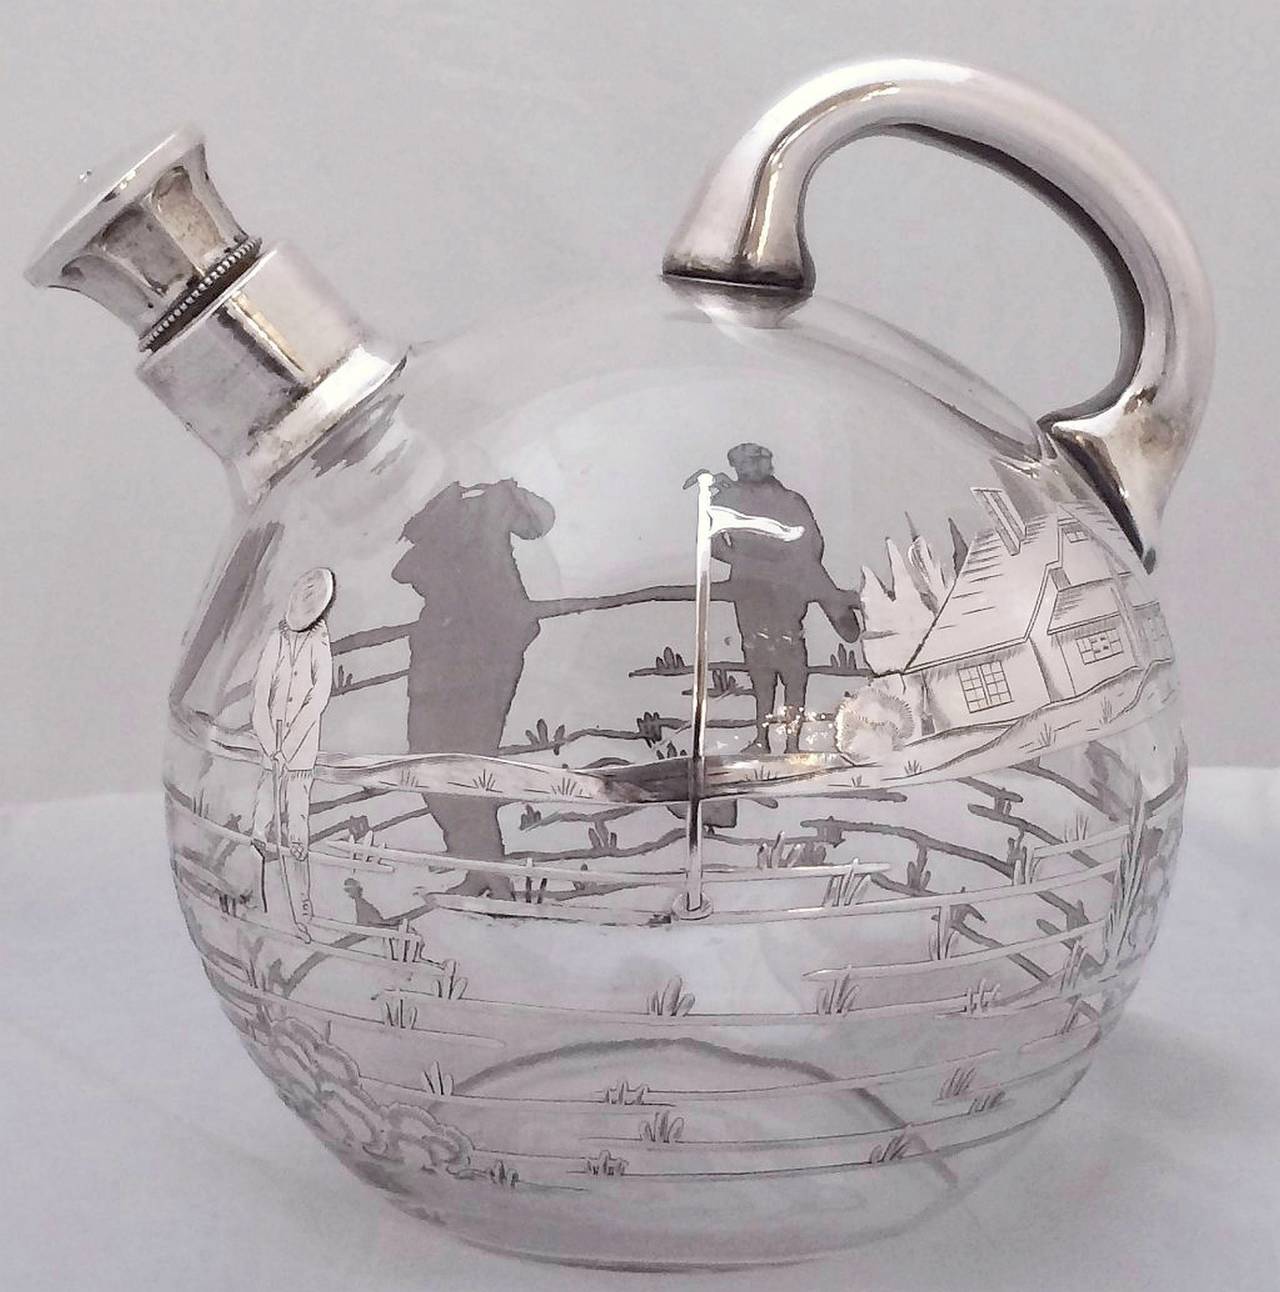 A handsome round English spirits decanter or claret jug featuring a glass body, handle, and spout with silver overlay. The silver overlay around the body featuring a design of two golfers on the obverse and a golfer with putting green,  flag, and